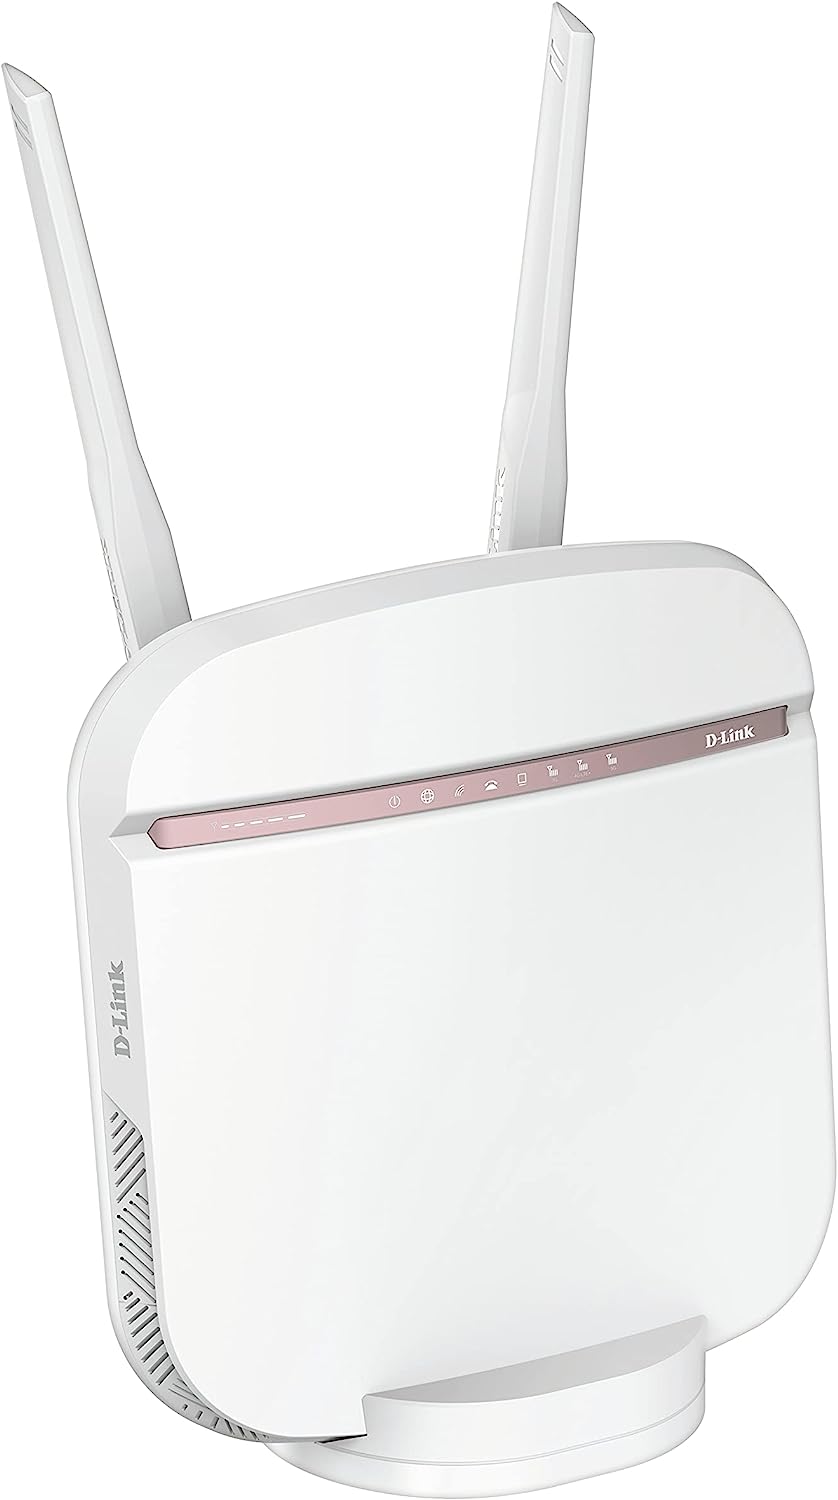 D-Link DWR-978 5G LTE Wifi Router